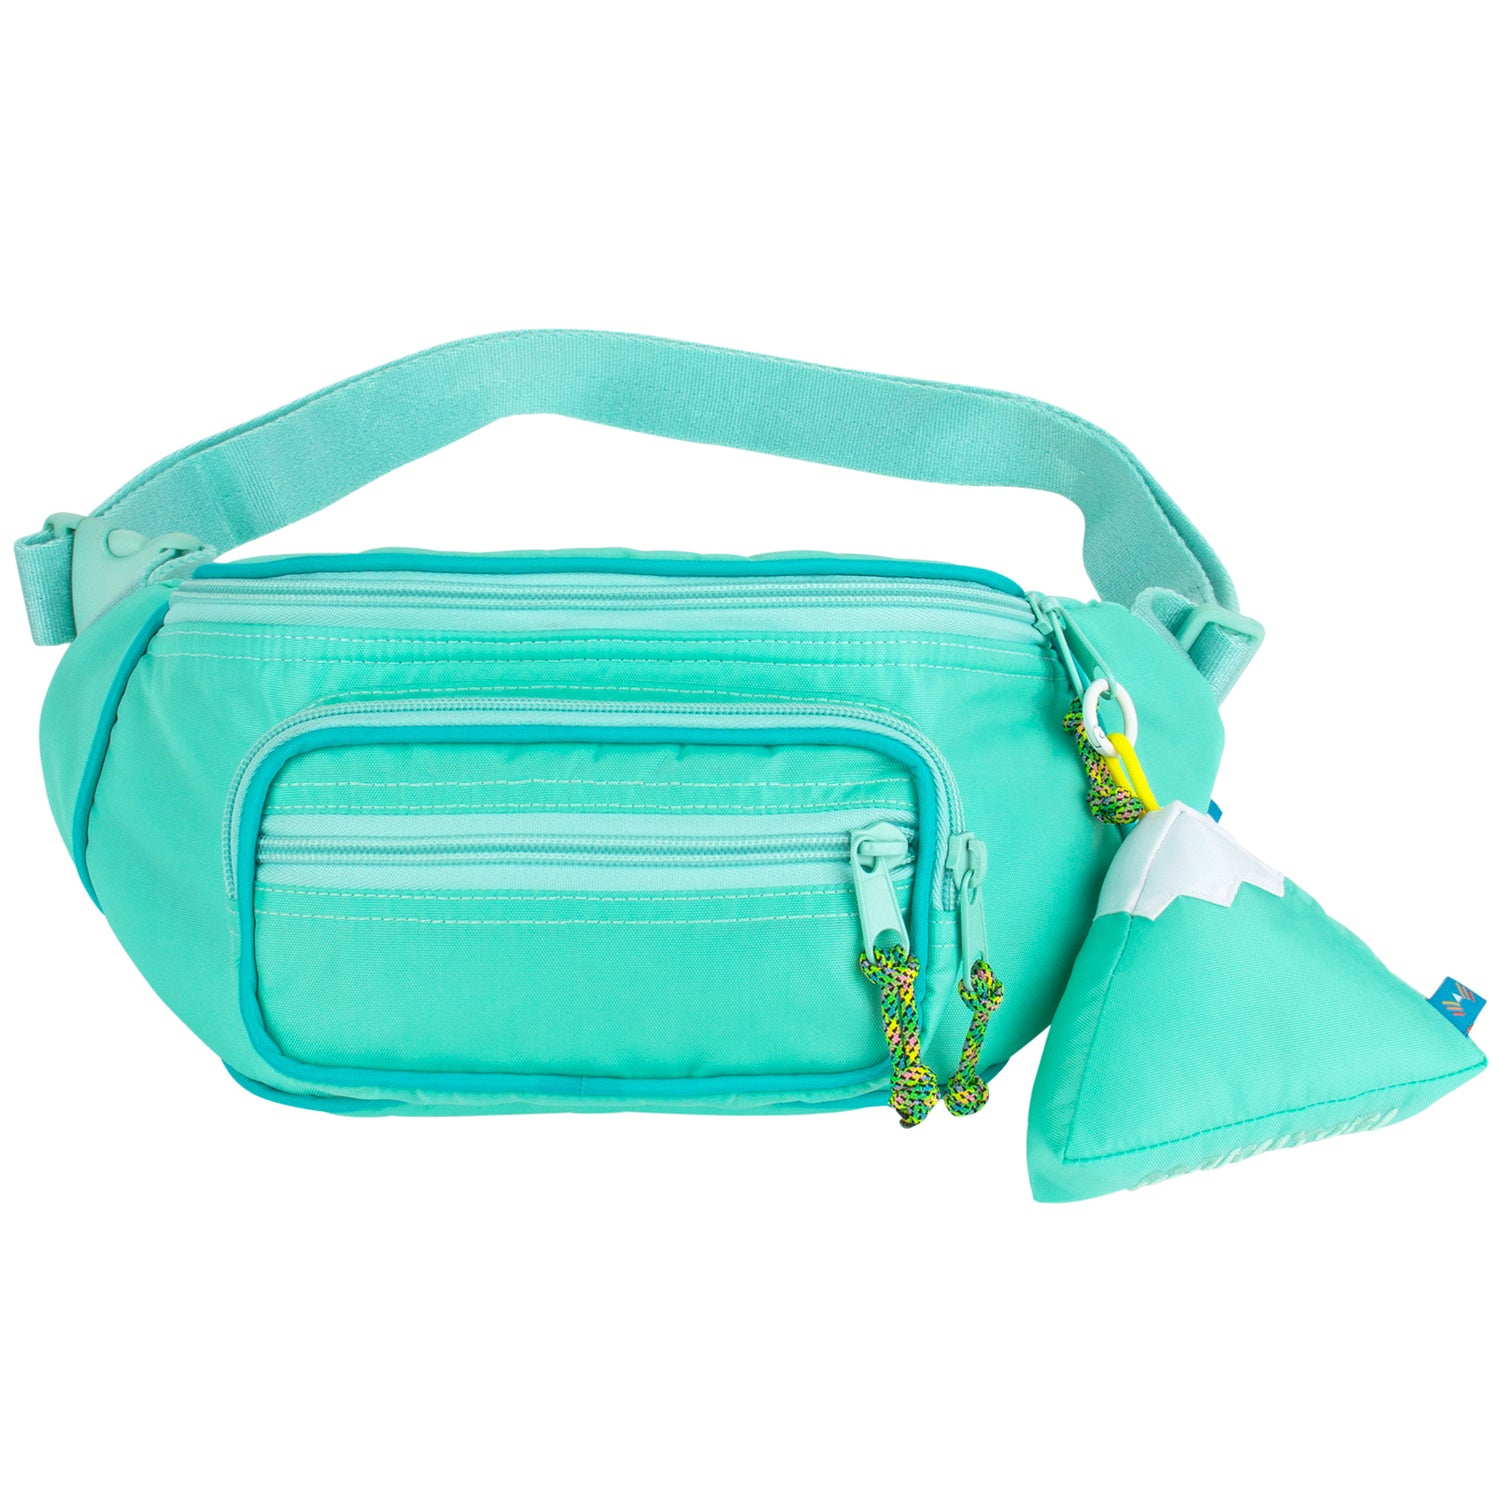 Large fanny pack sling in a mint blue color with a mountain design keychain